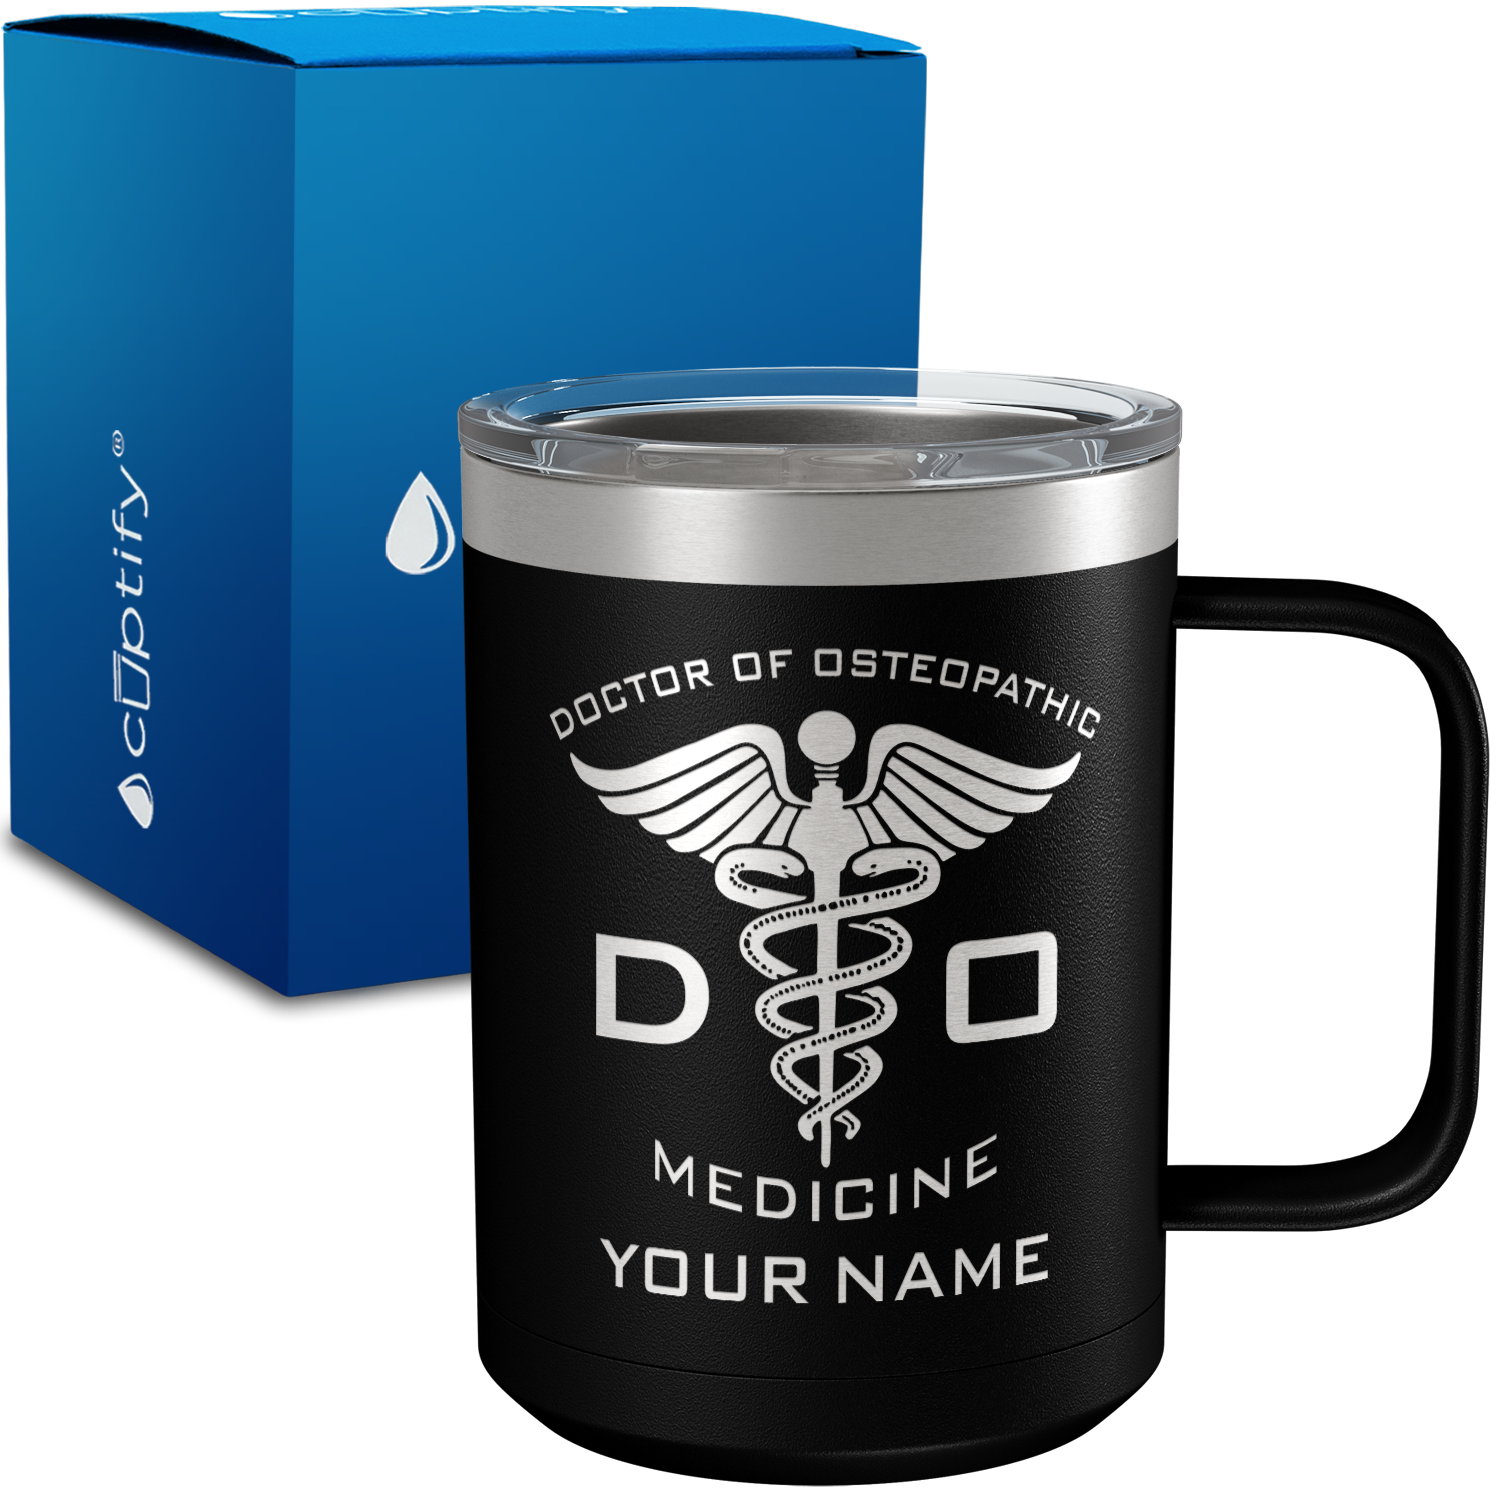 DO Doctor of Osteopathic Personalized 15oz Stainless Steel Mug